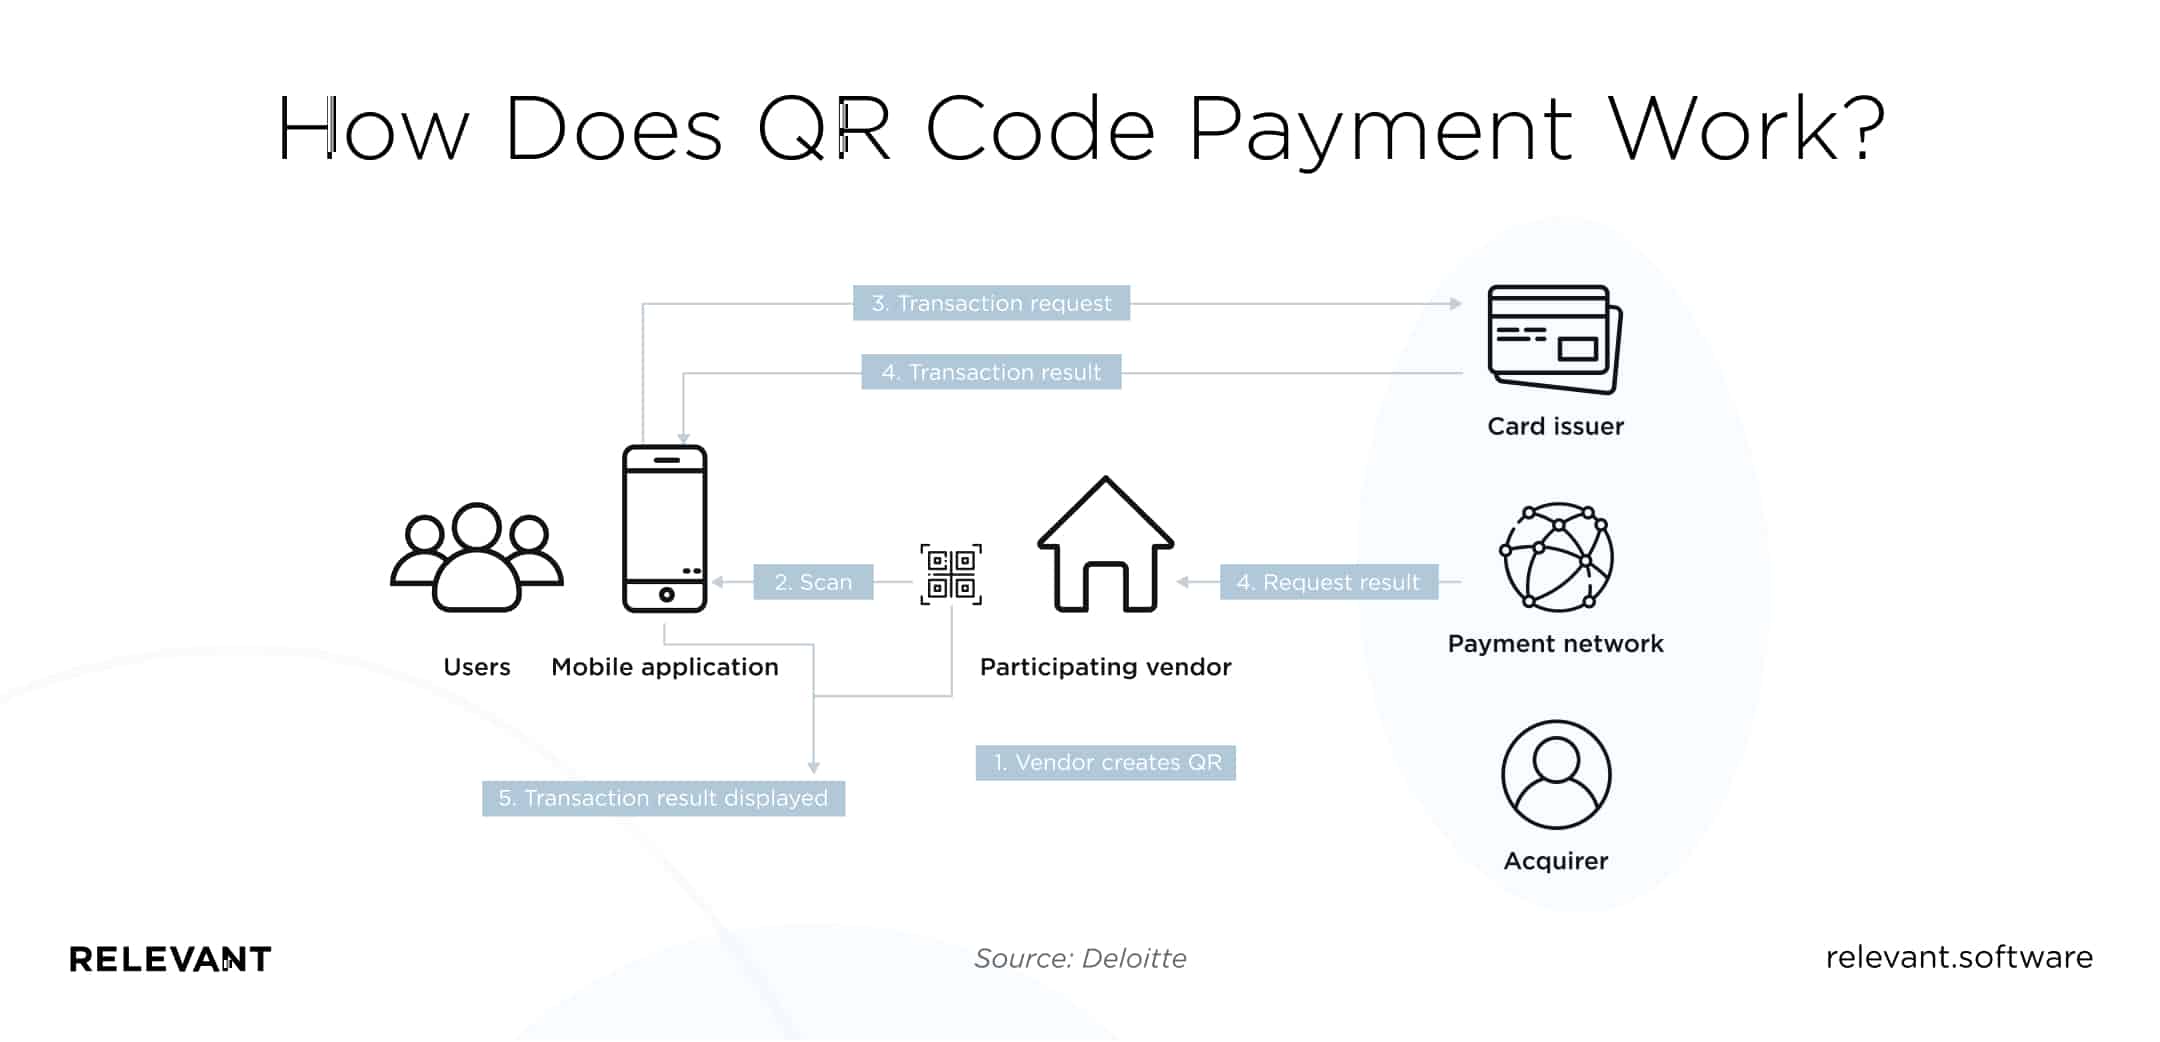 how does QR codes for payment work?